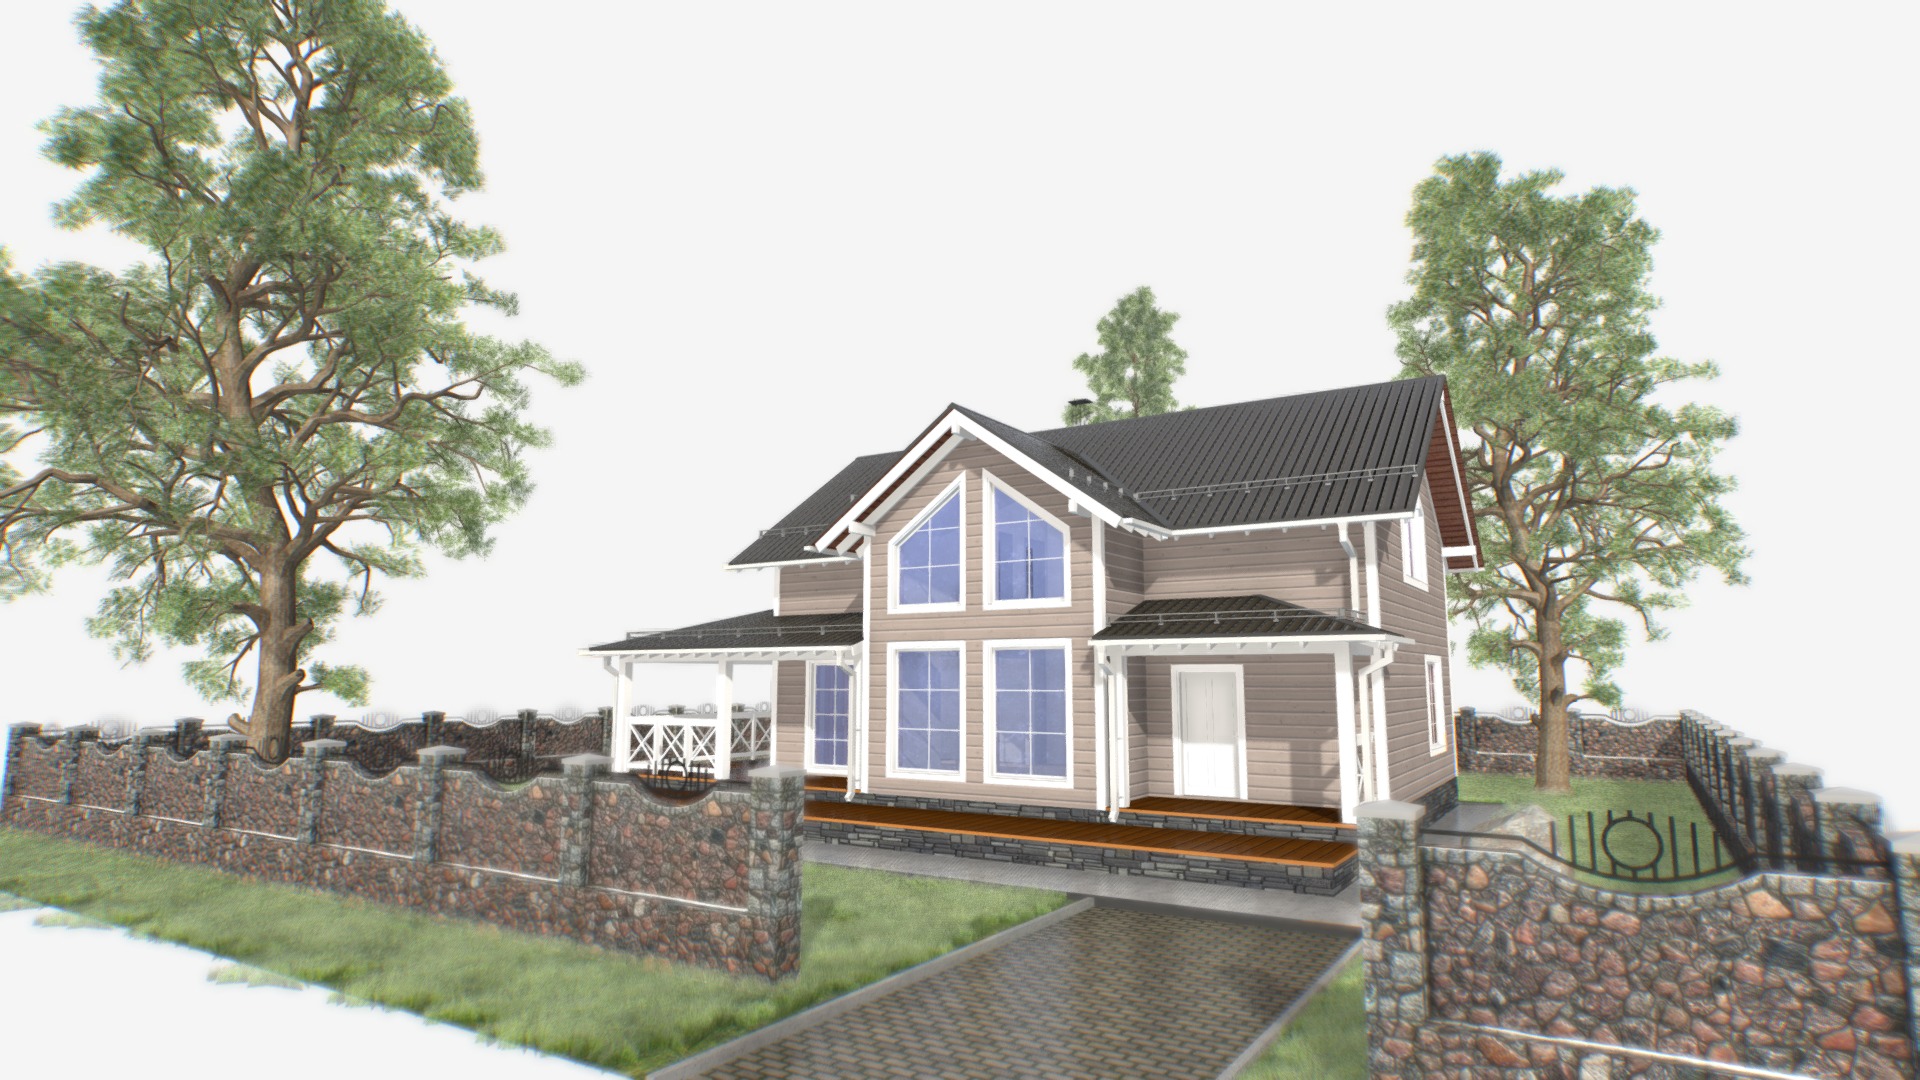 3D model 2 level cottage 12_2019 - This is a 3D model of the 2 level cottage 12_2019. The 3D model is about a house with a stone wall and trees.